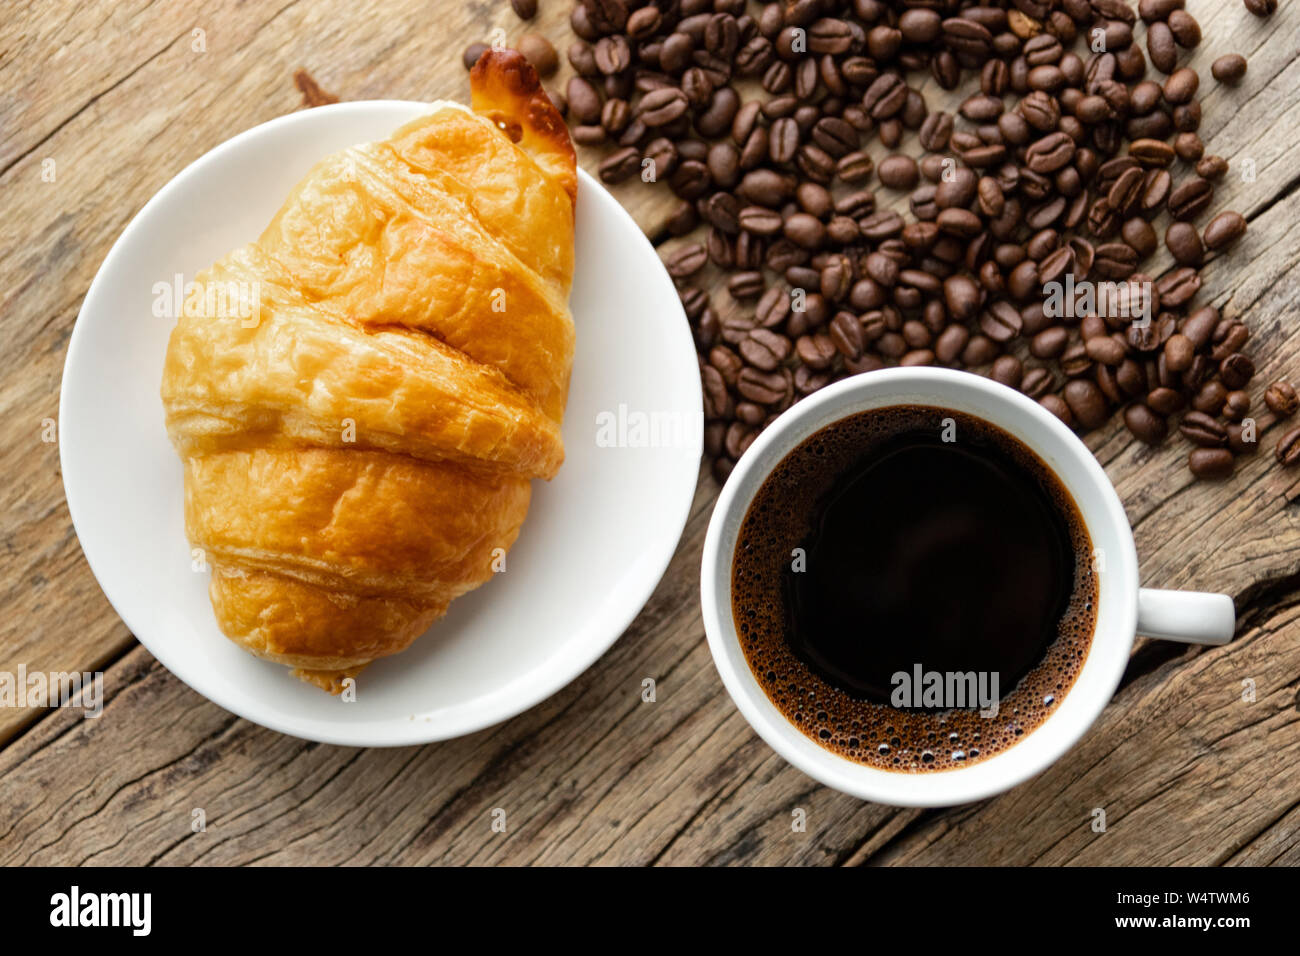 continental breakfast with fresh croissant and hot coffee on wooden background, decoration with coffee bean Stock Photo